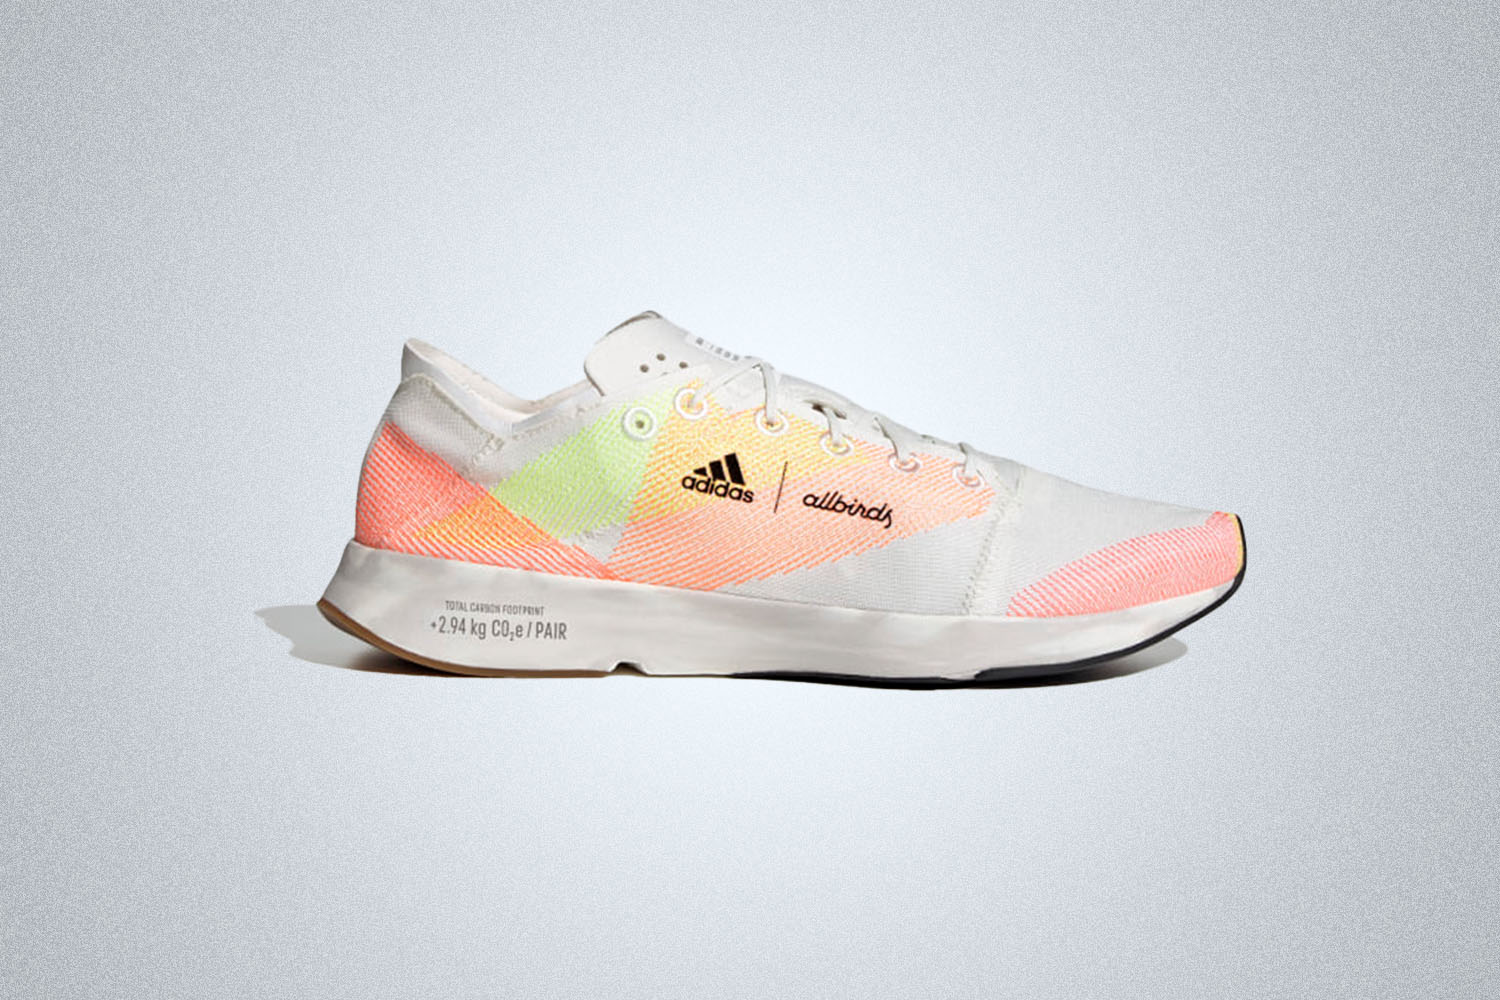 a white Adidas sneaker with pink, orange and yellow pattering on a grey background